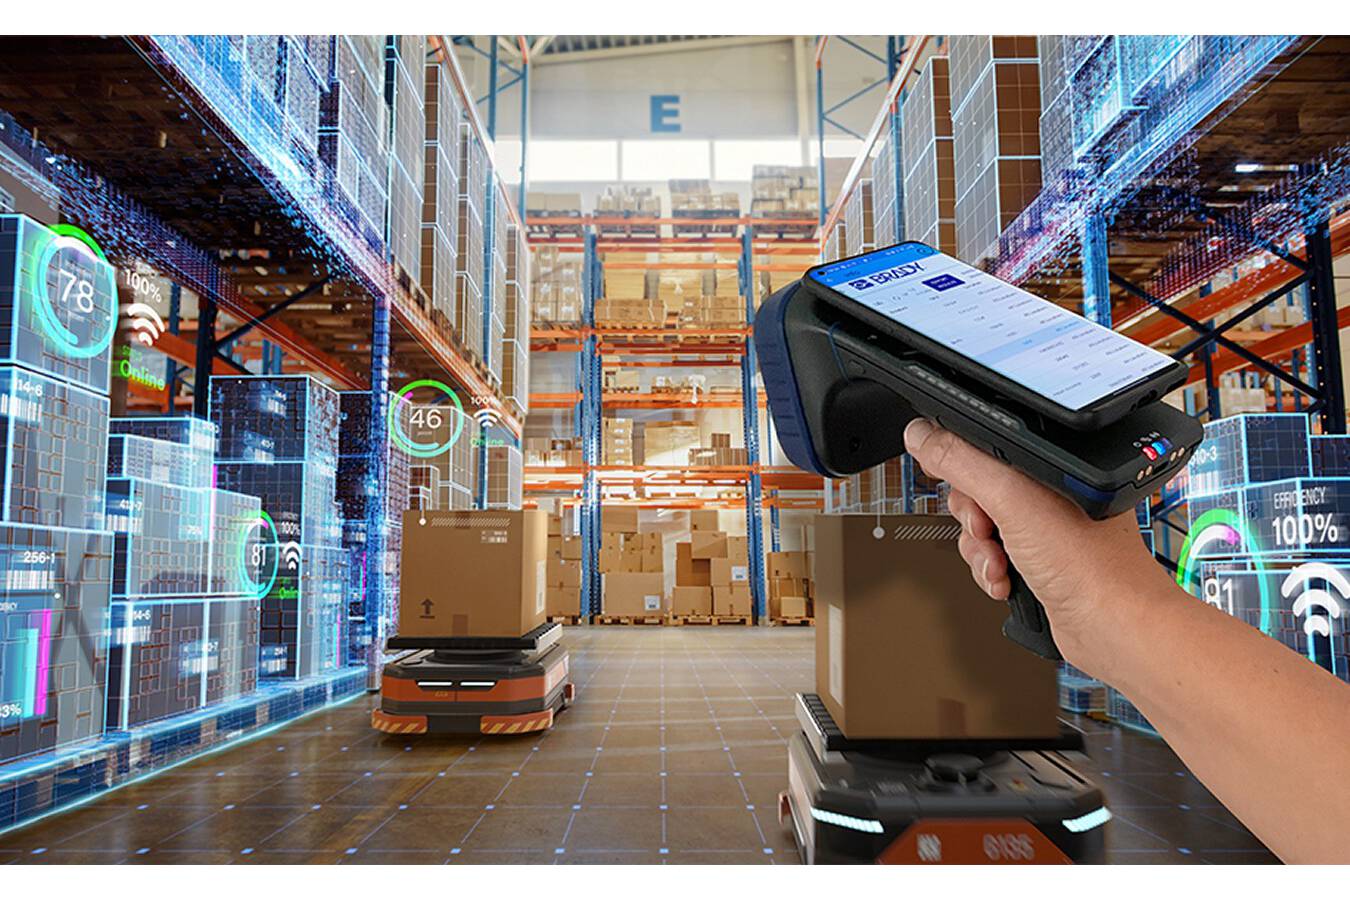 Easily turn your phone into a personal radar Which items or assets should be on your radar? With our innovative EXA81 add-on your phone and tablet can pick up any RFID labelled item within 15 metres. See highlighted assets on-screen, and home in. No line of sight required. 